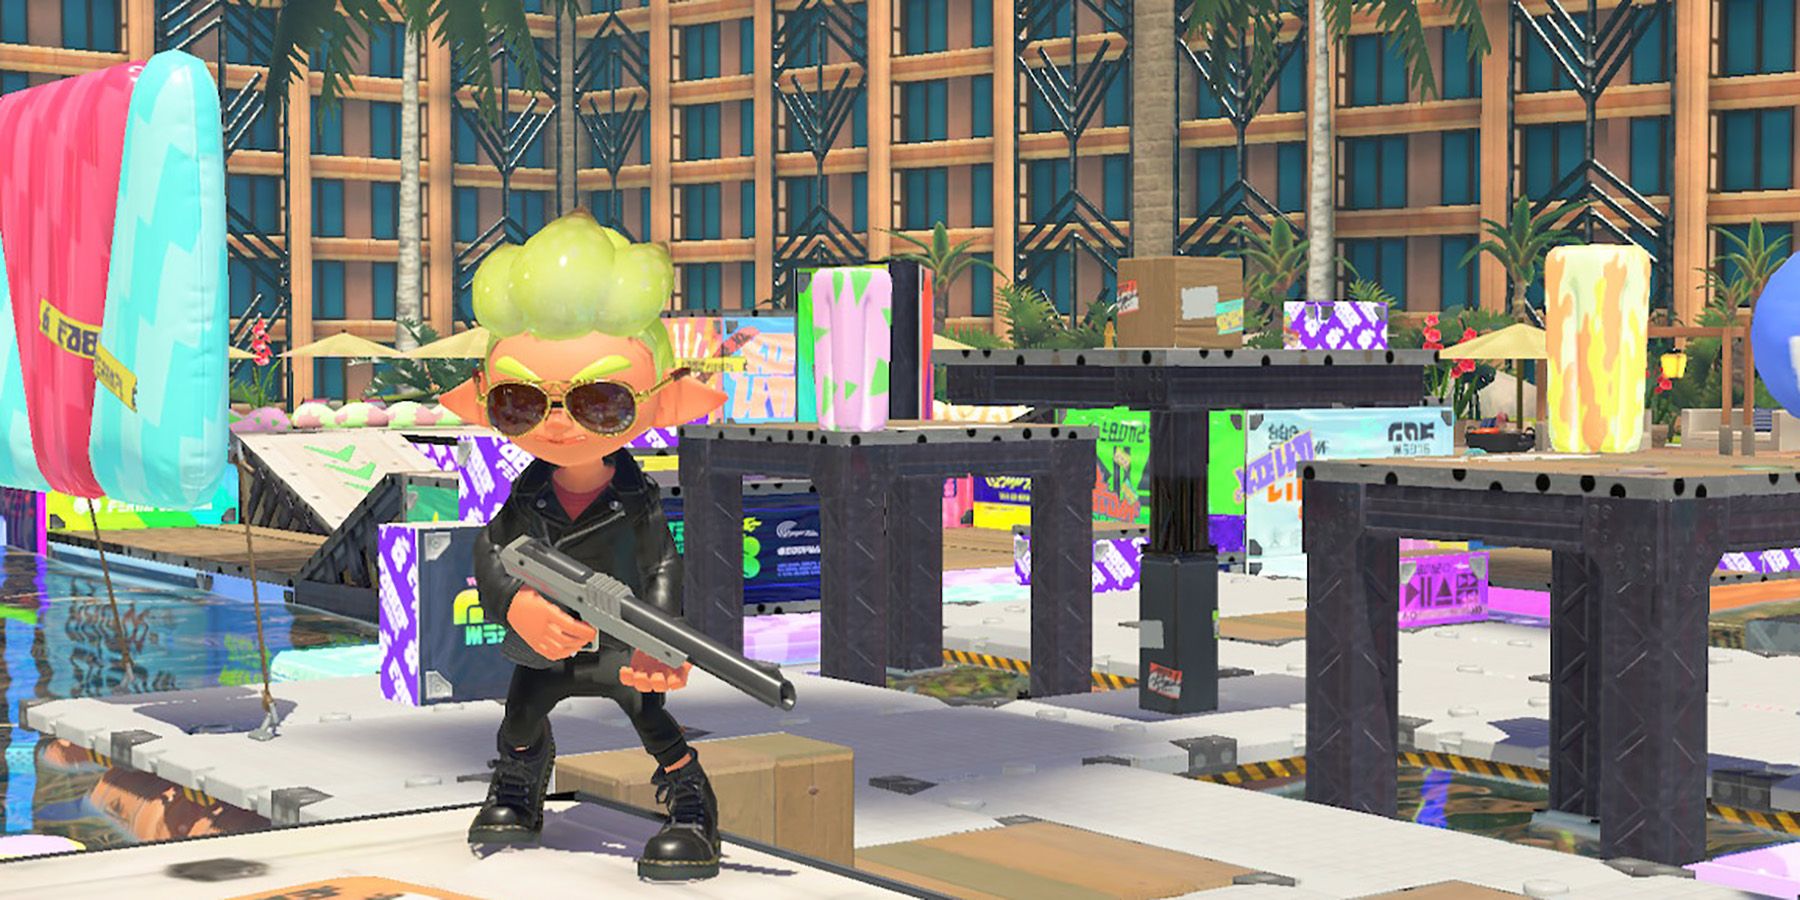 Splatoon 3 Player Spots Adorable Callback to First Game